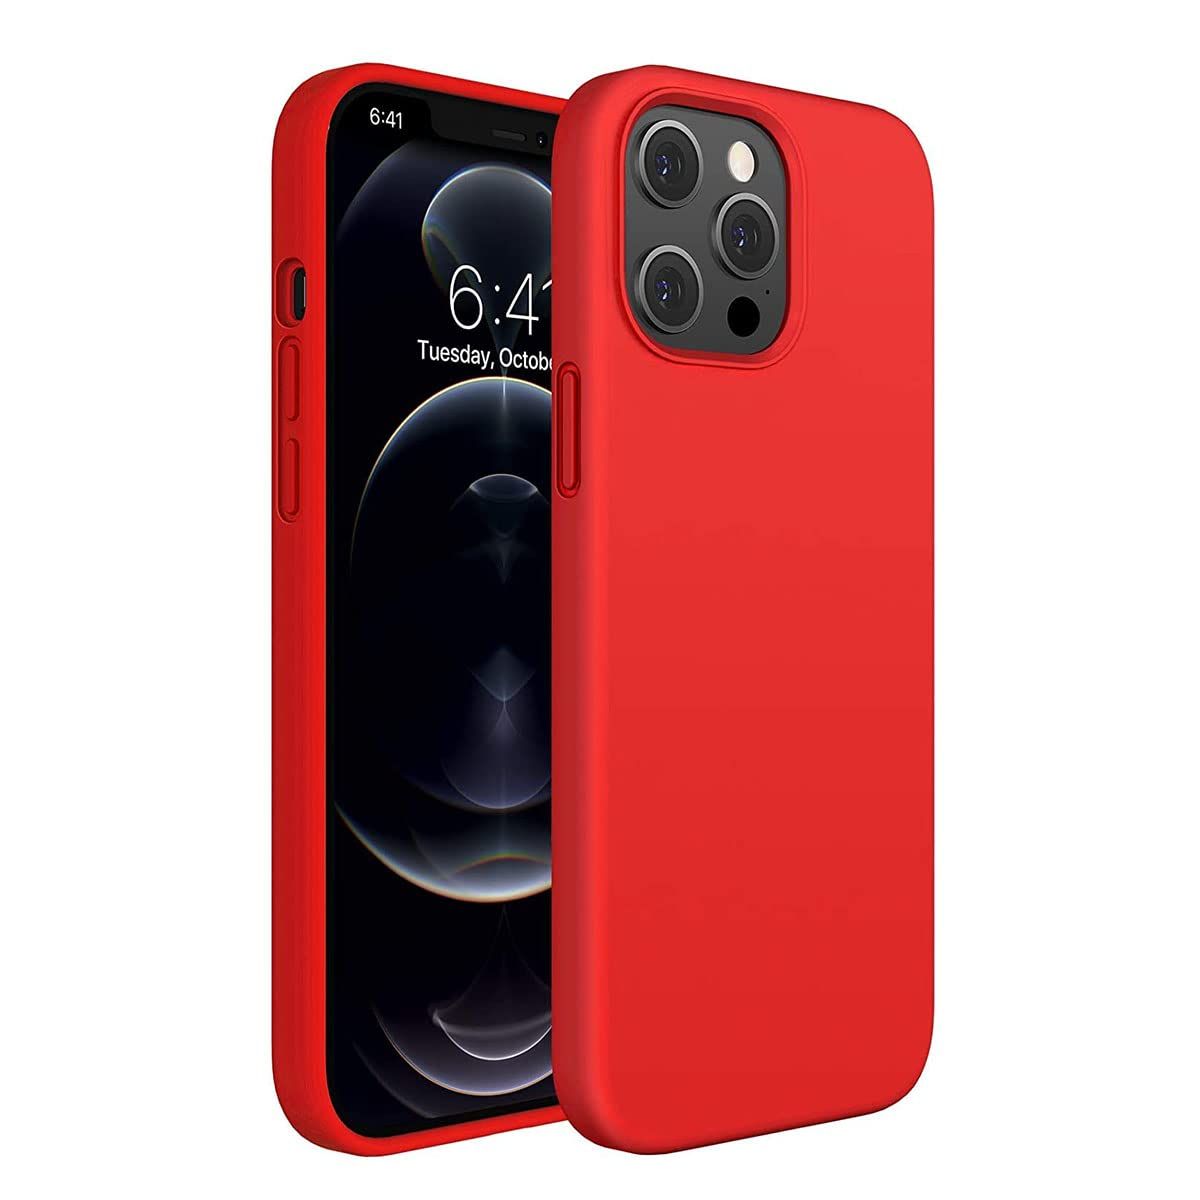 LIRAMARK Liquid Silicone Soft Back Cover Case for Apple iPhone 12 / Apple iPhone 12 Pro (6.1 inch) (Red)